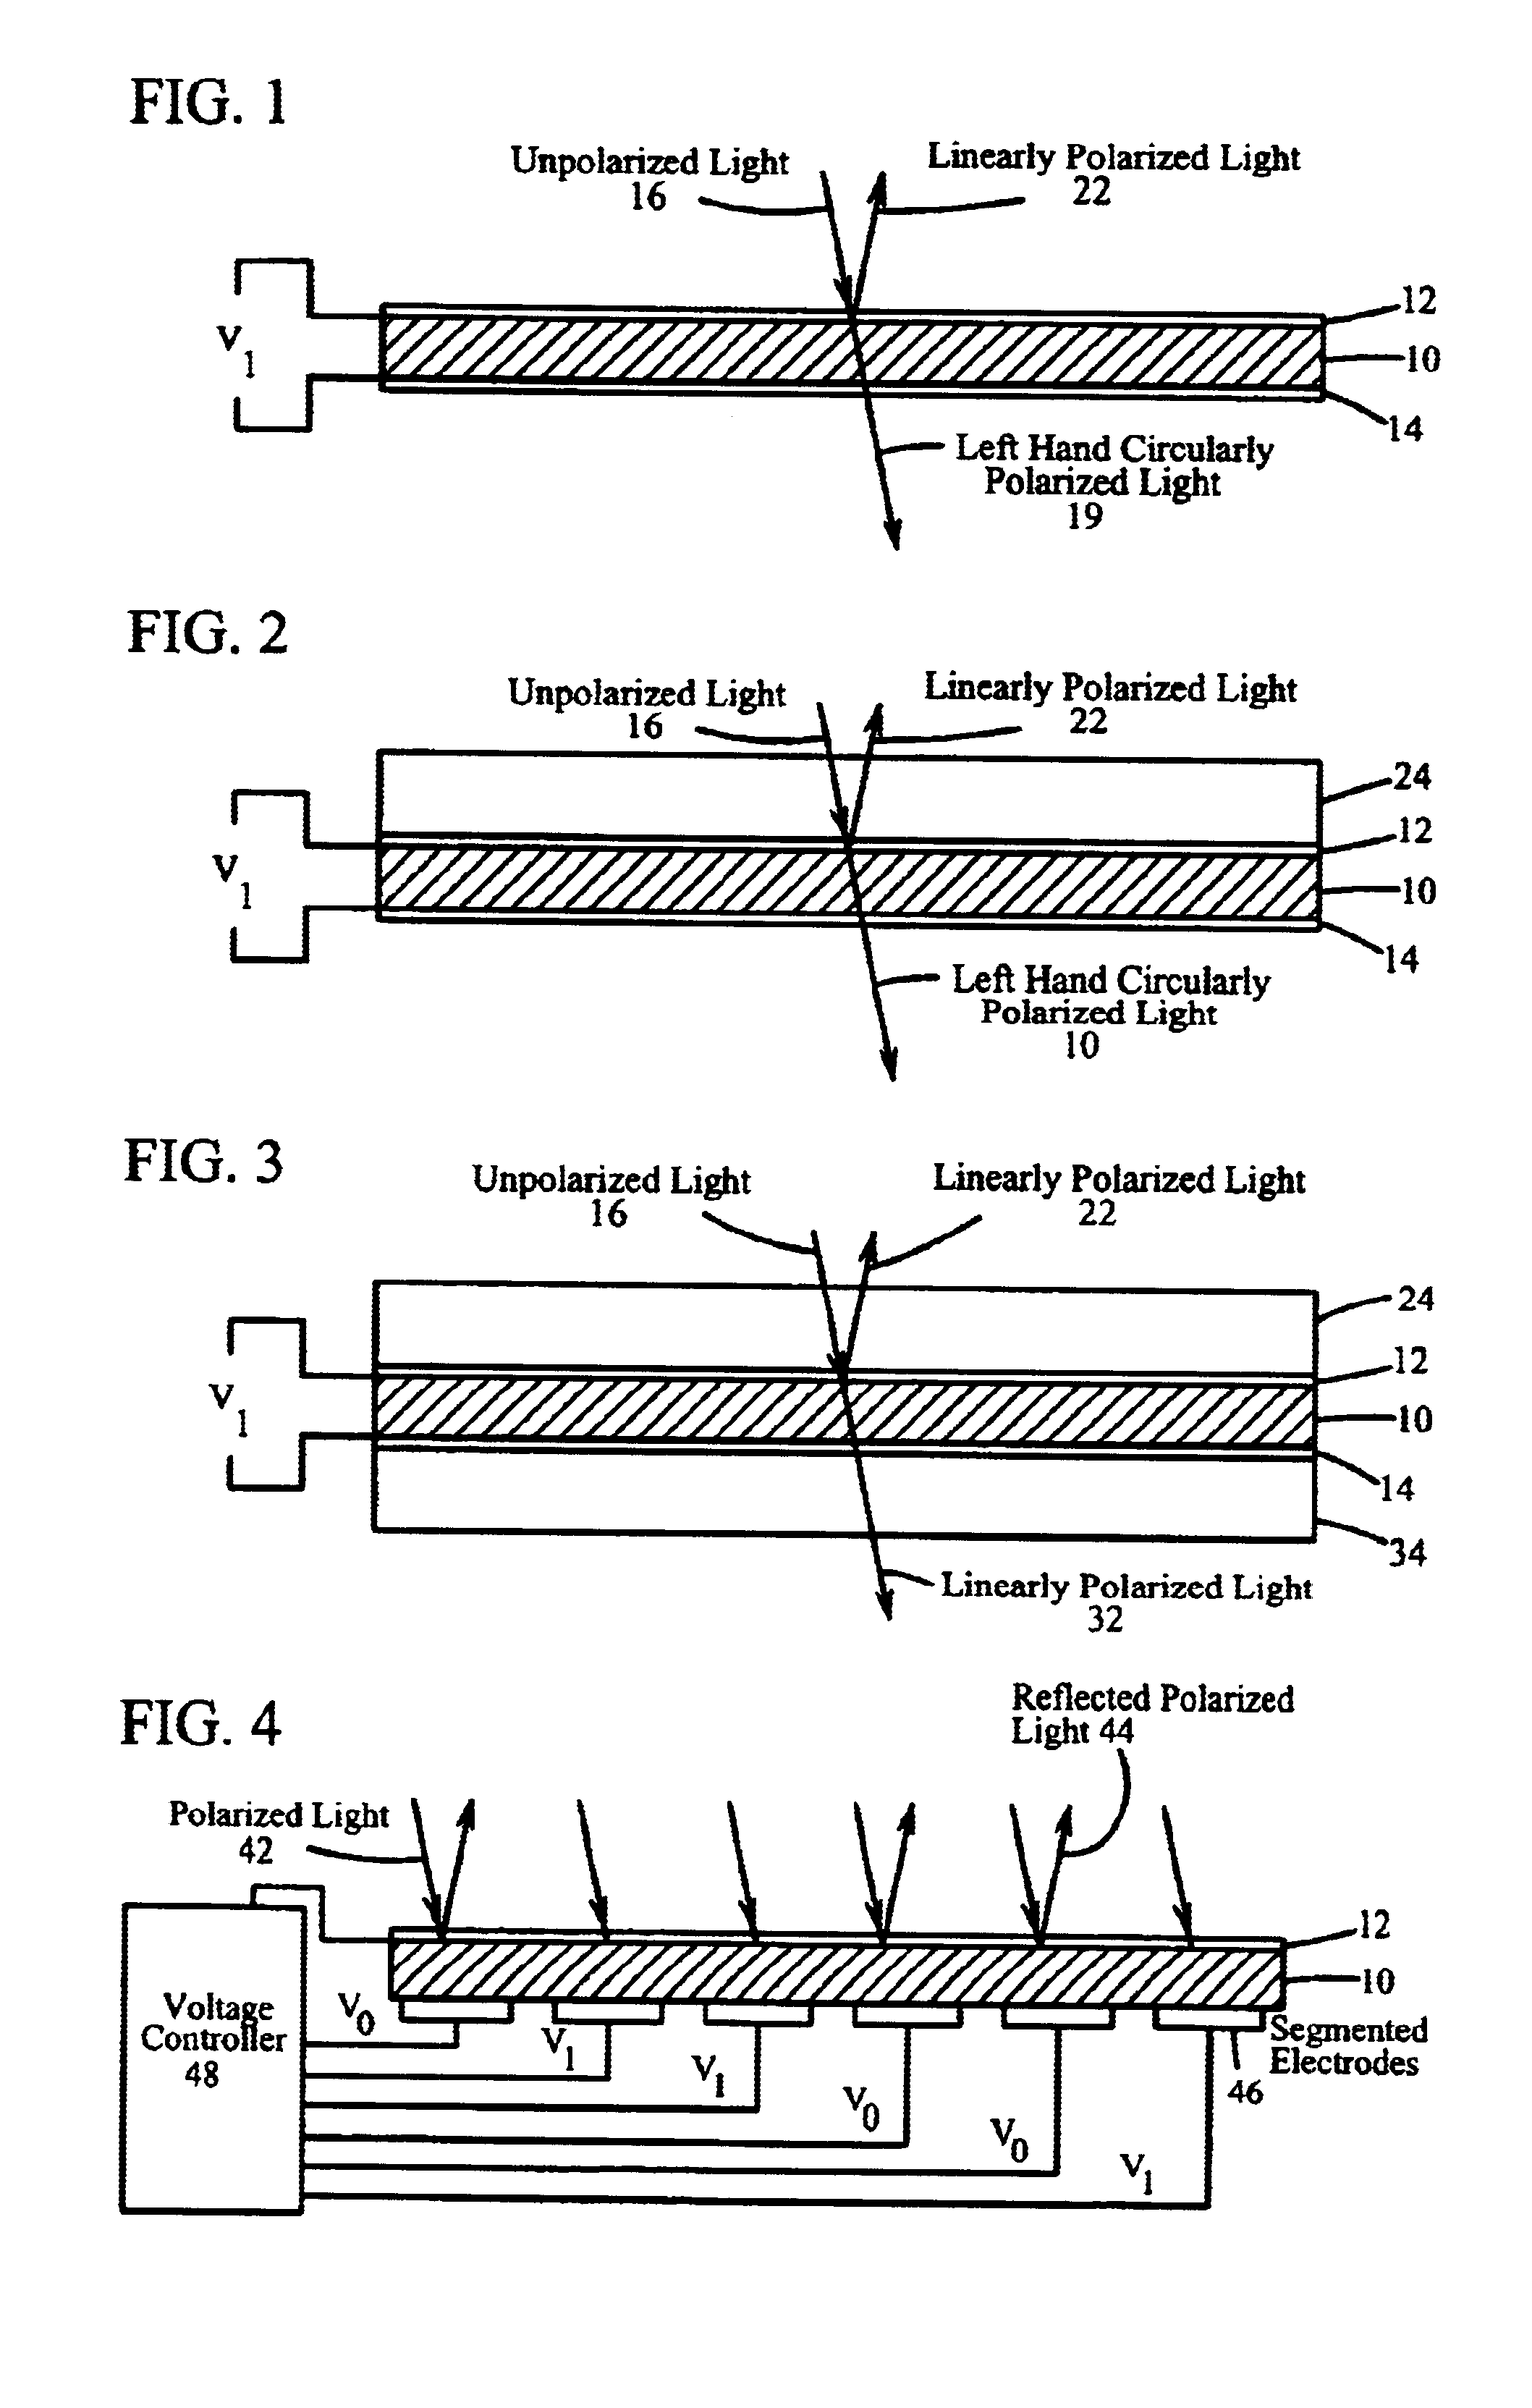 Spectrum-controllable reflective polarizers having electrically-switchable modes of operation